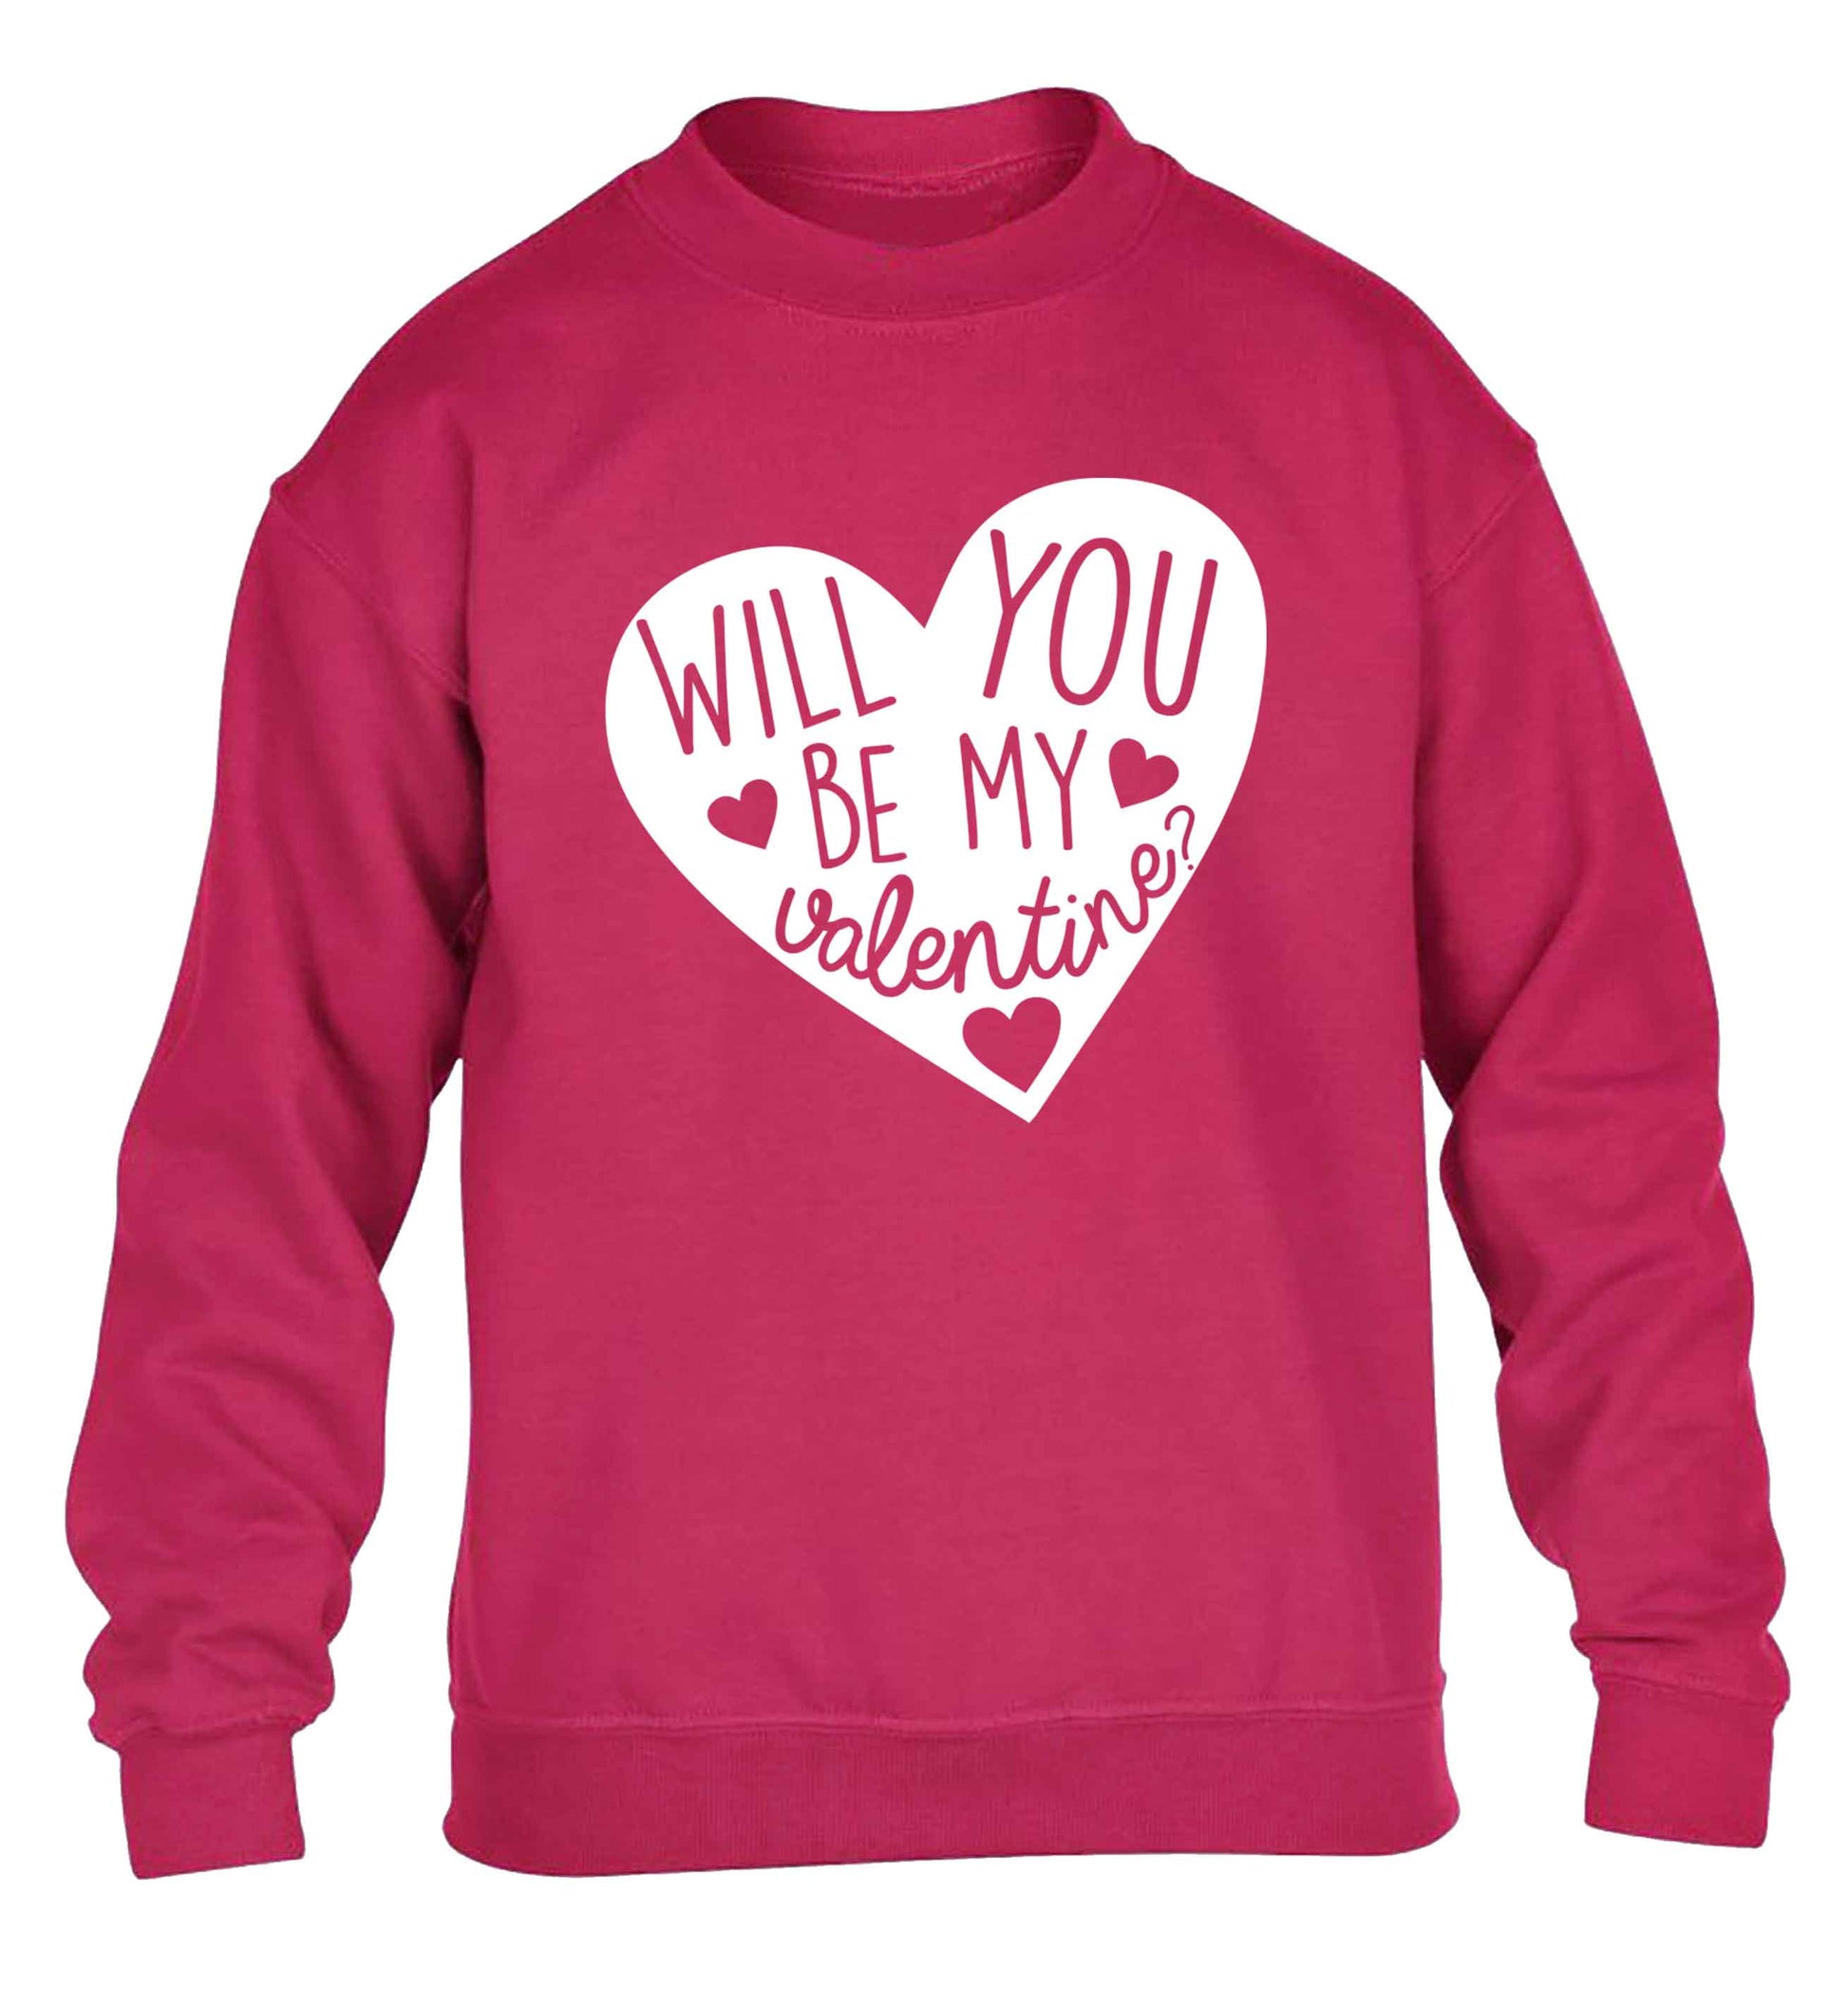 Will you be my valentine? children's pink sweater 12-13 Years